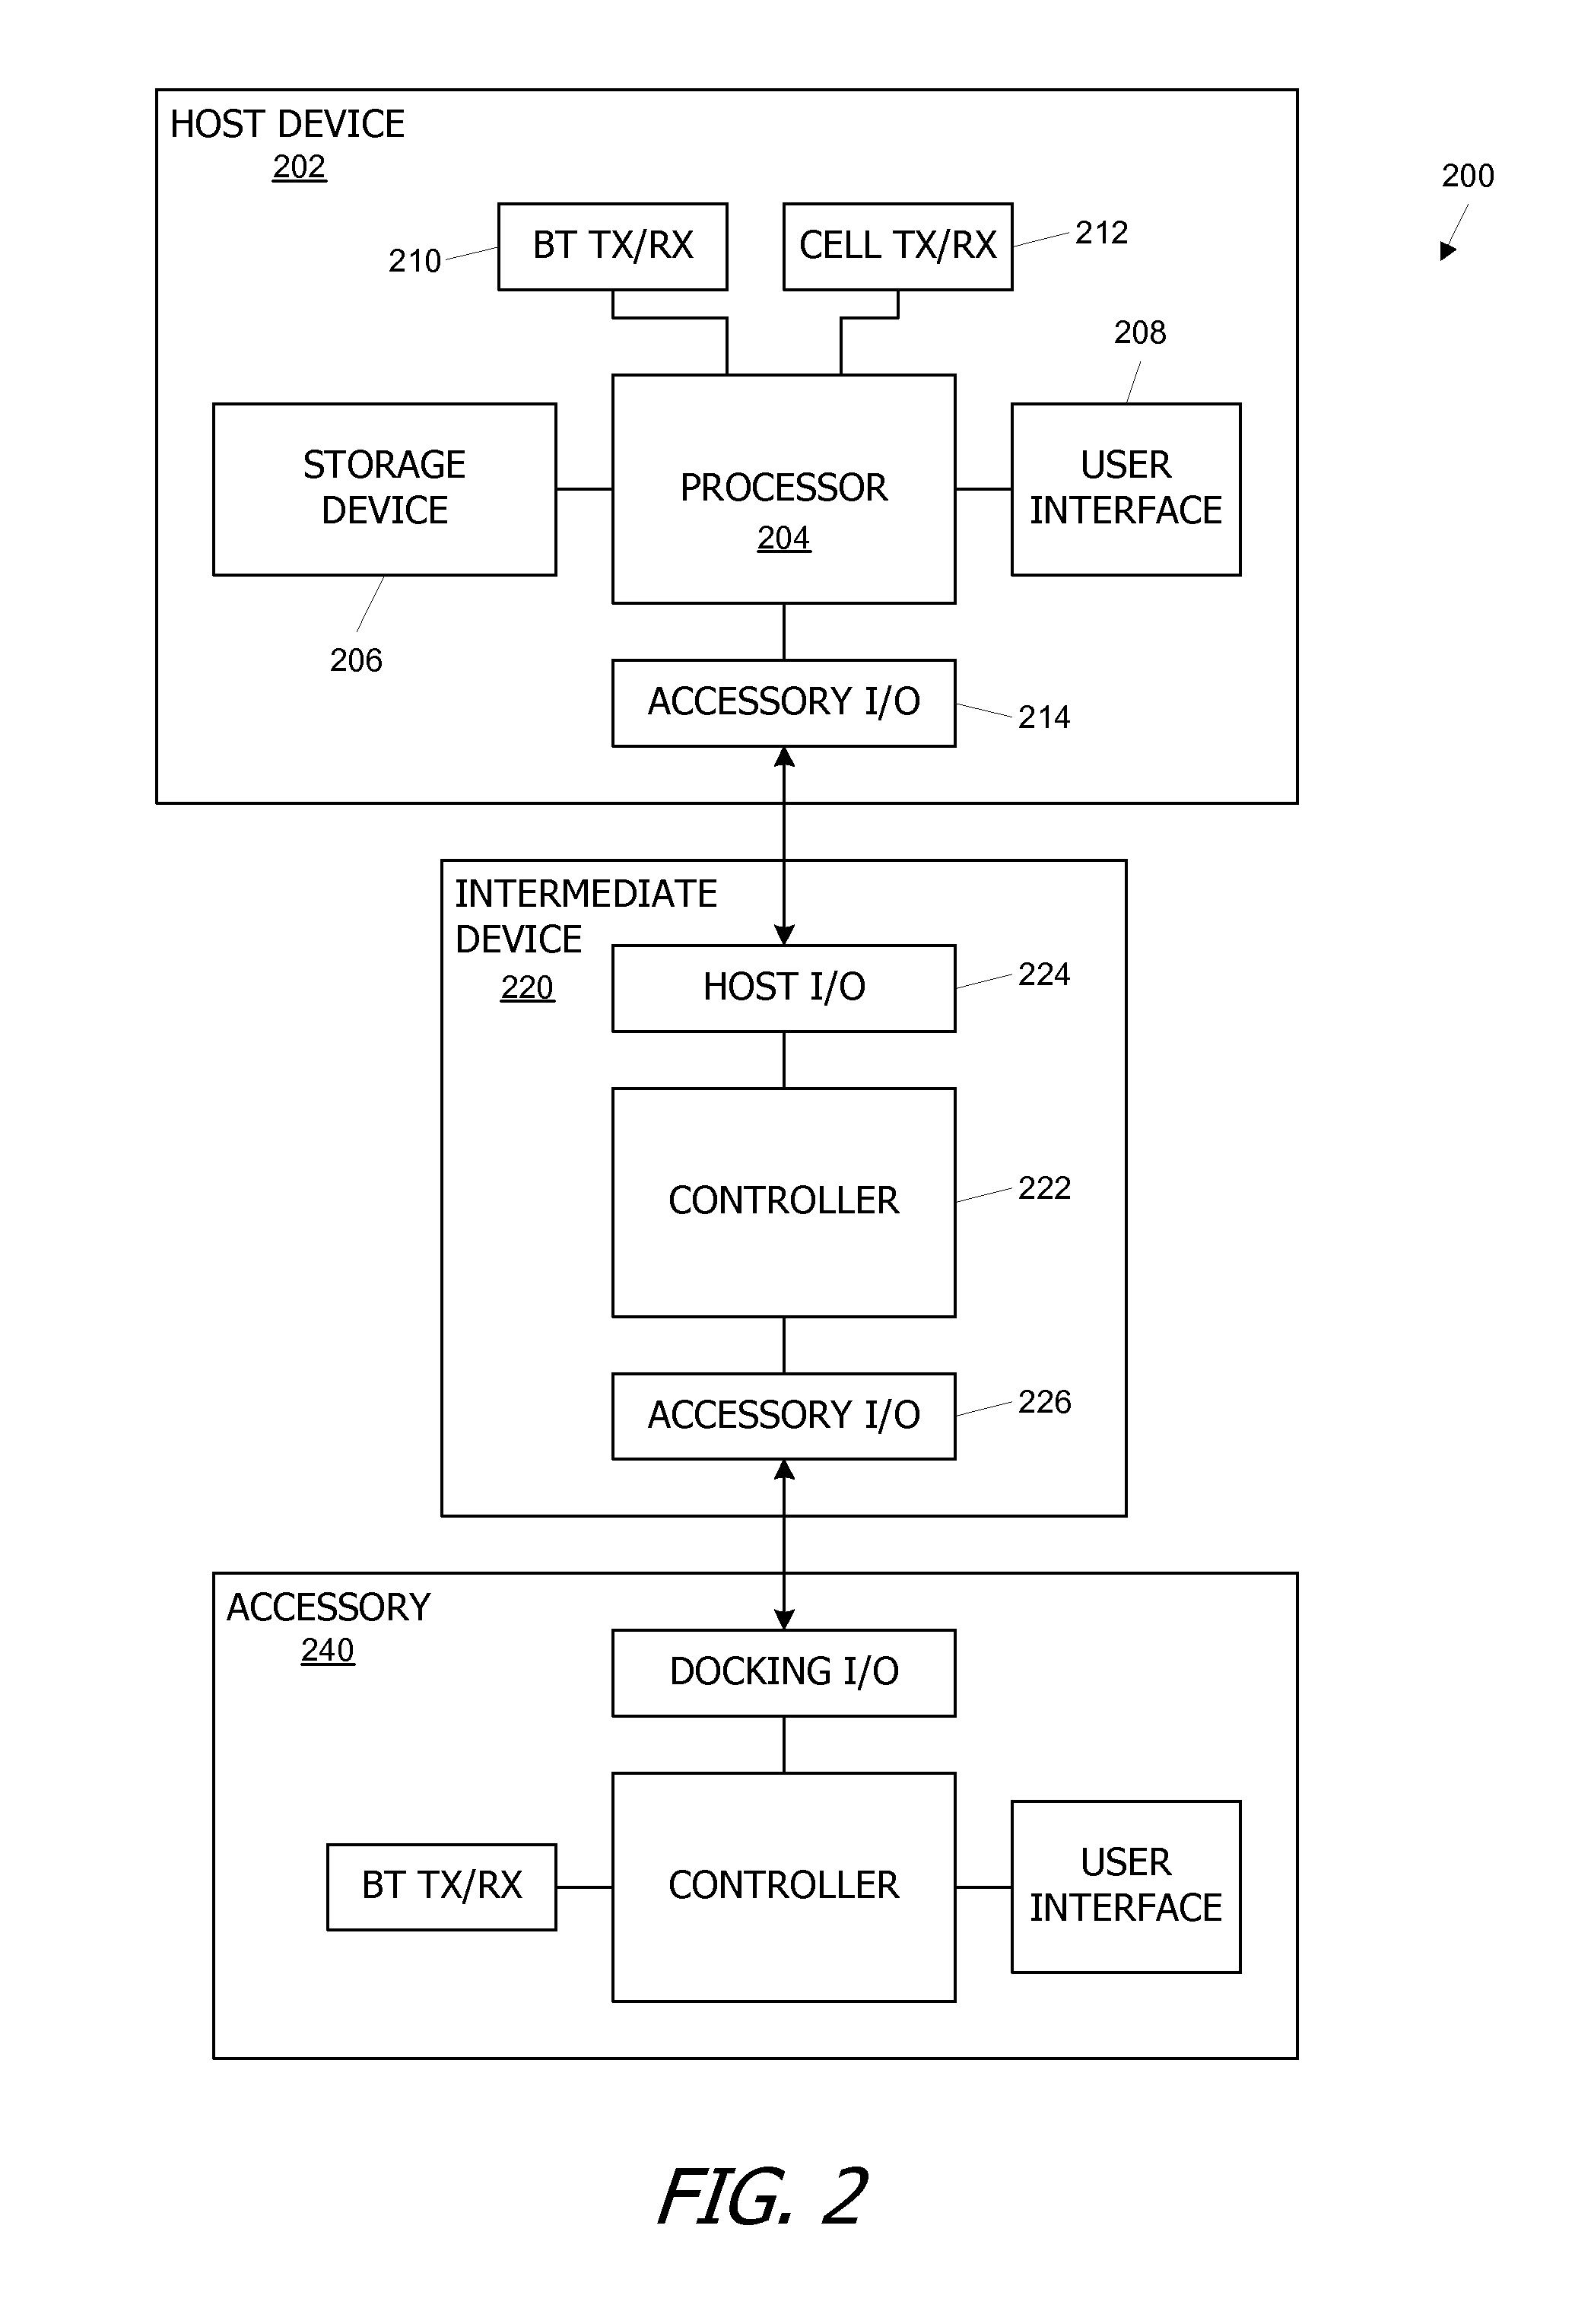 Communication between a host device and an accessory via an intermediate device